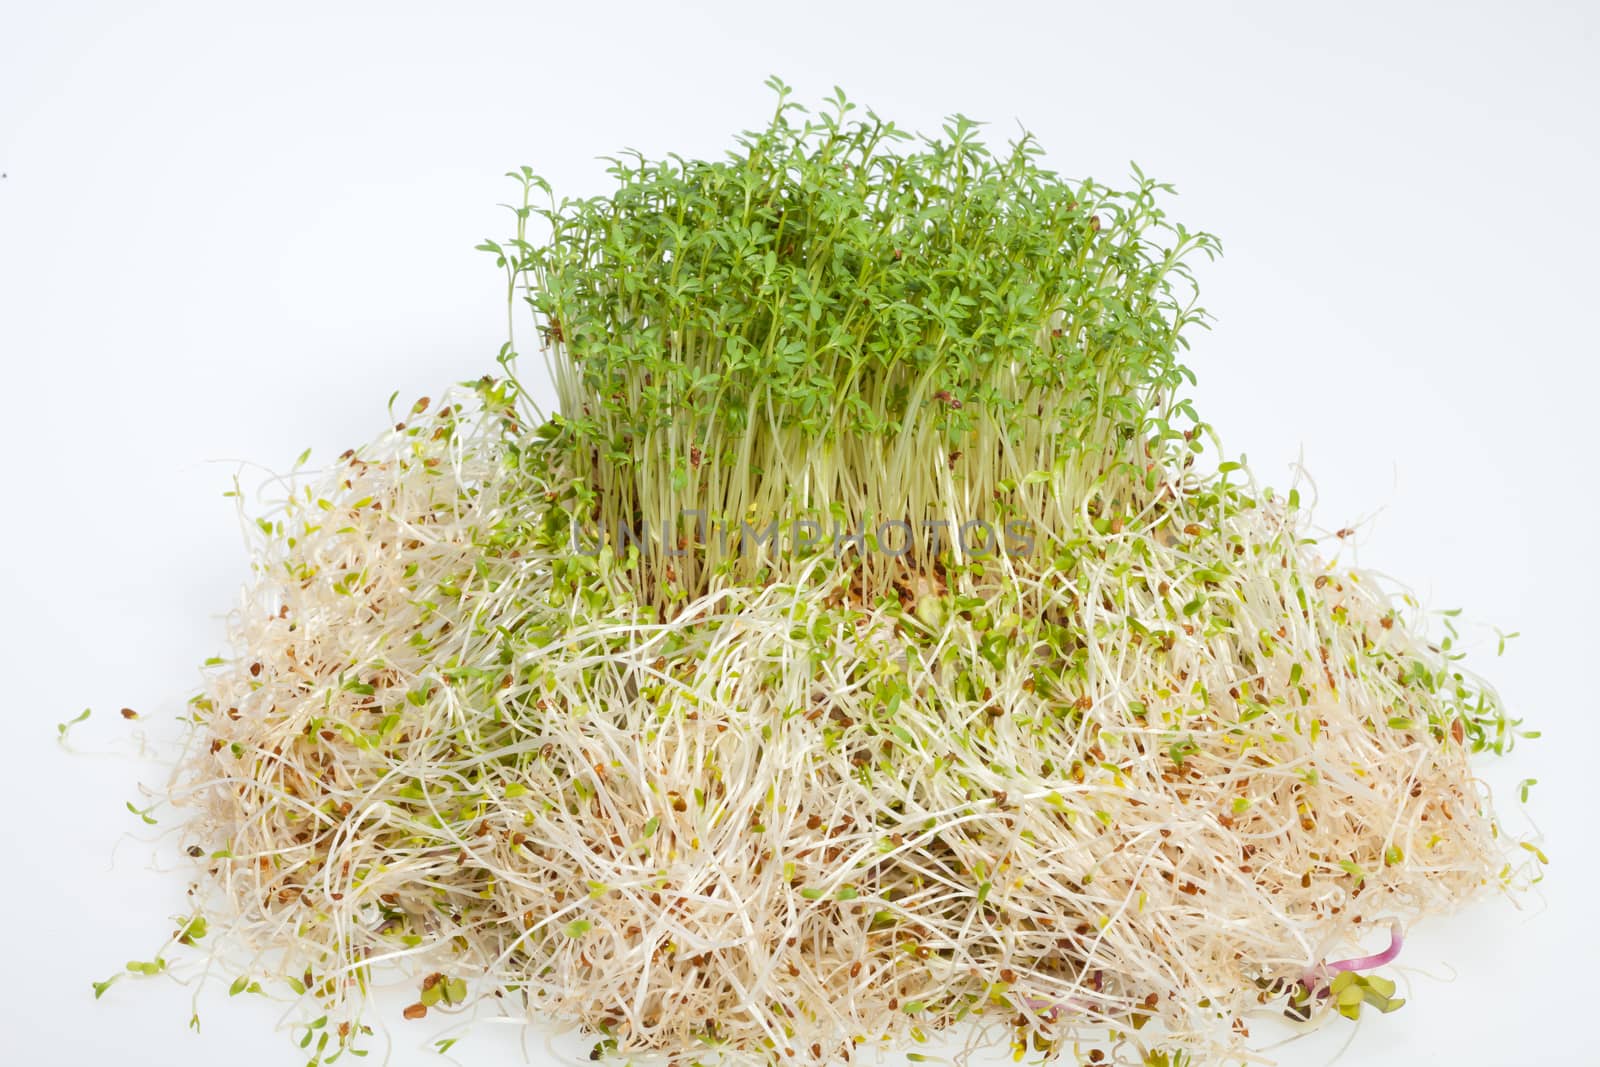 Fresh alfalfa sprouts and cress on white background  by wjarek